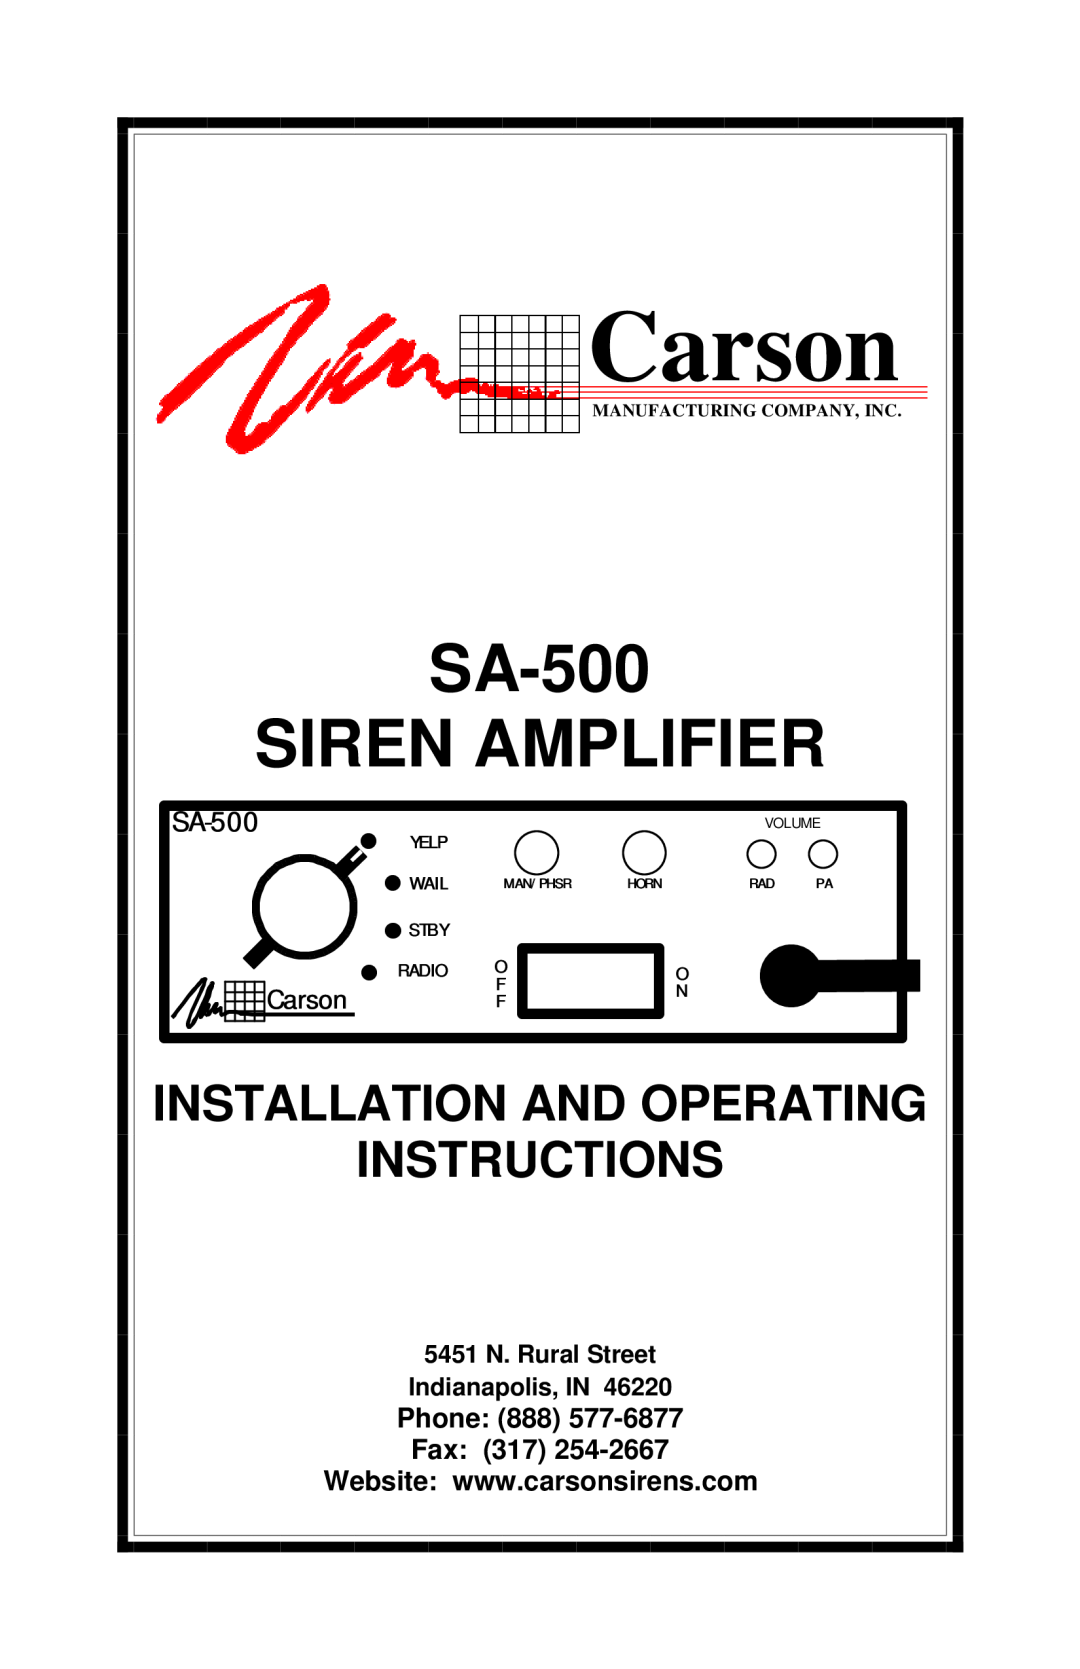 Carson Optical SA-500 manual 5451 N. Rural Street, Indianapolis, IN, Carson, Siren Amplifier, Instructions, Phone, Yelp 